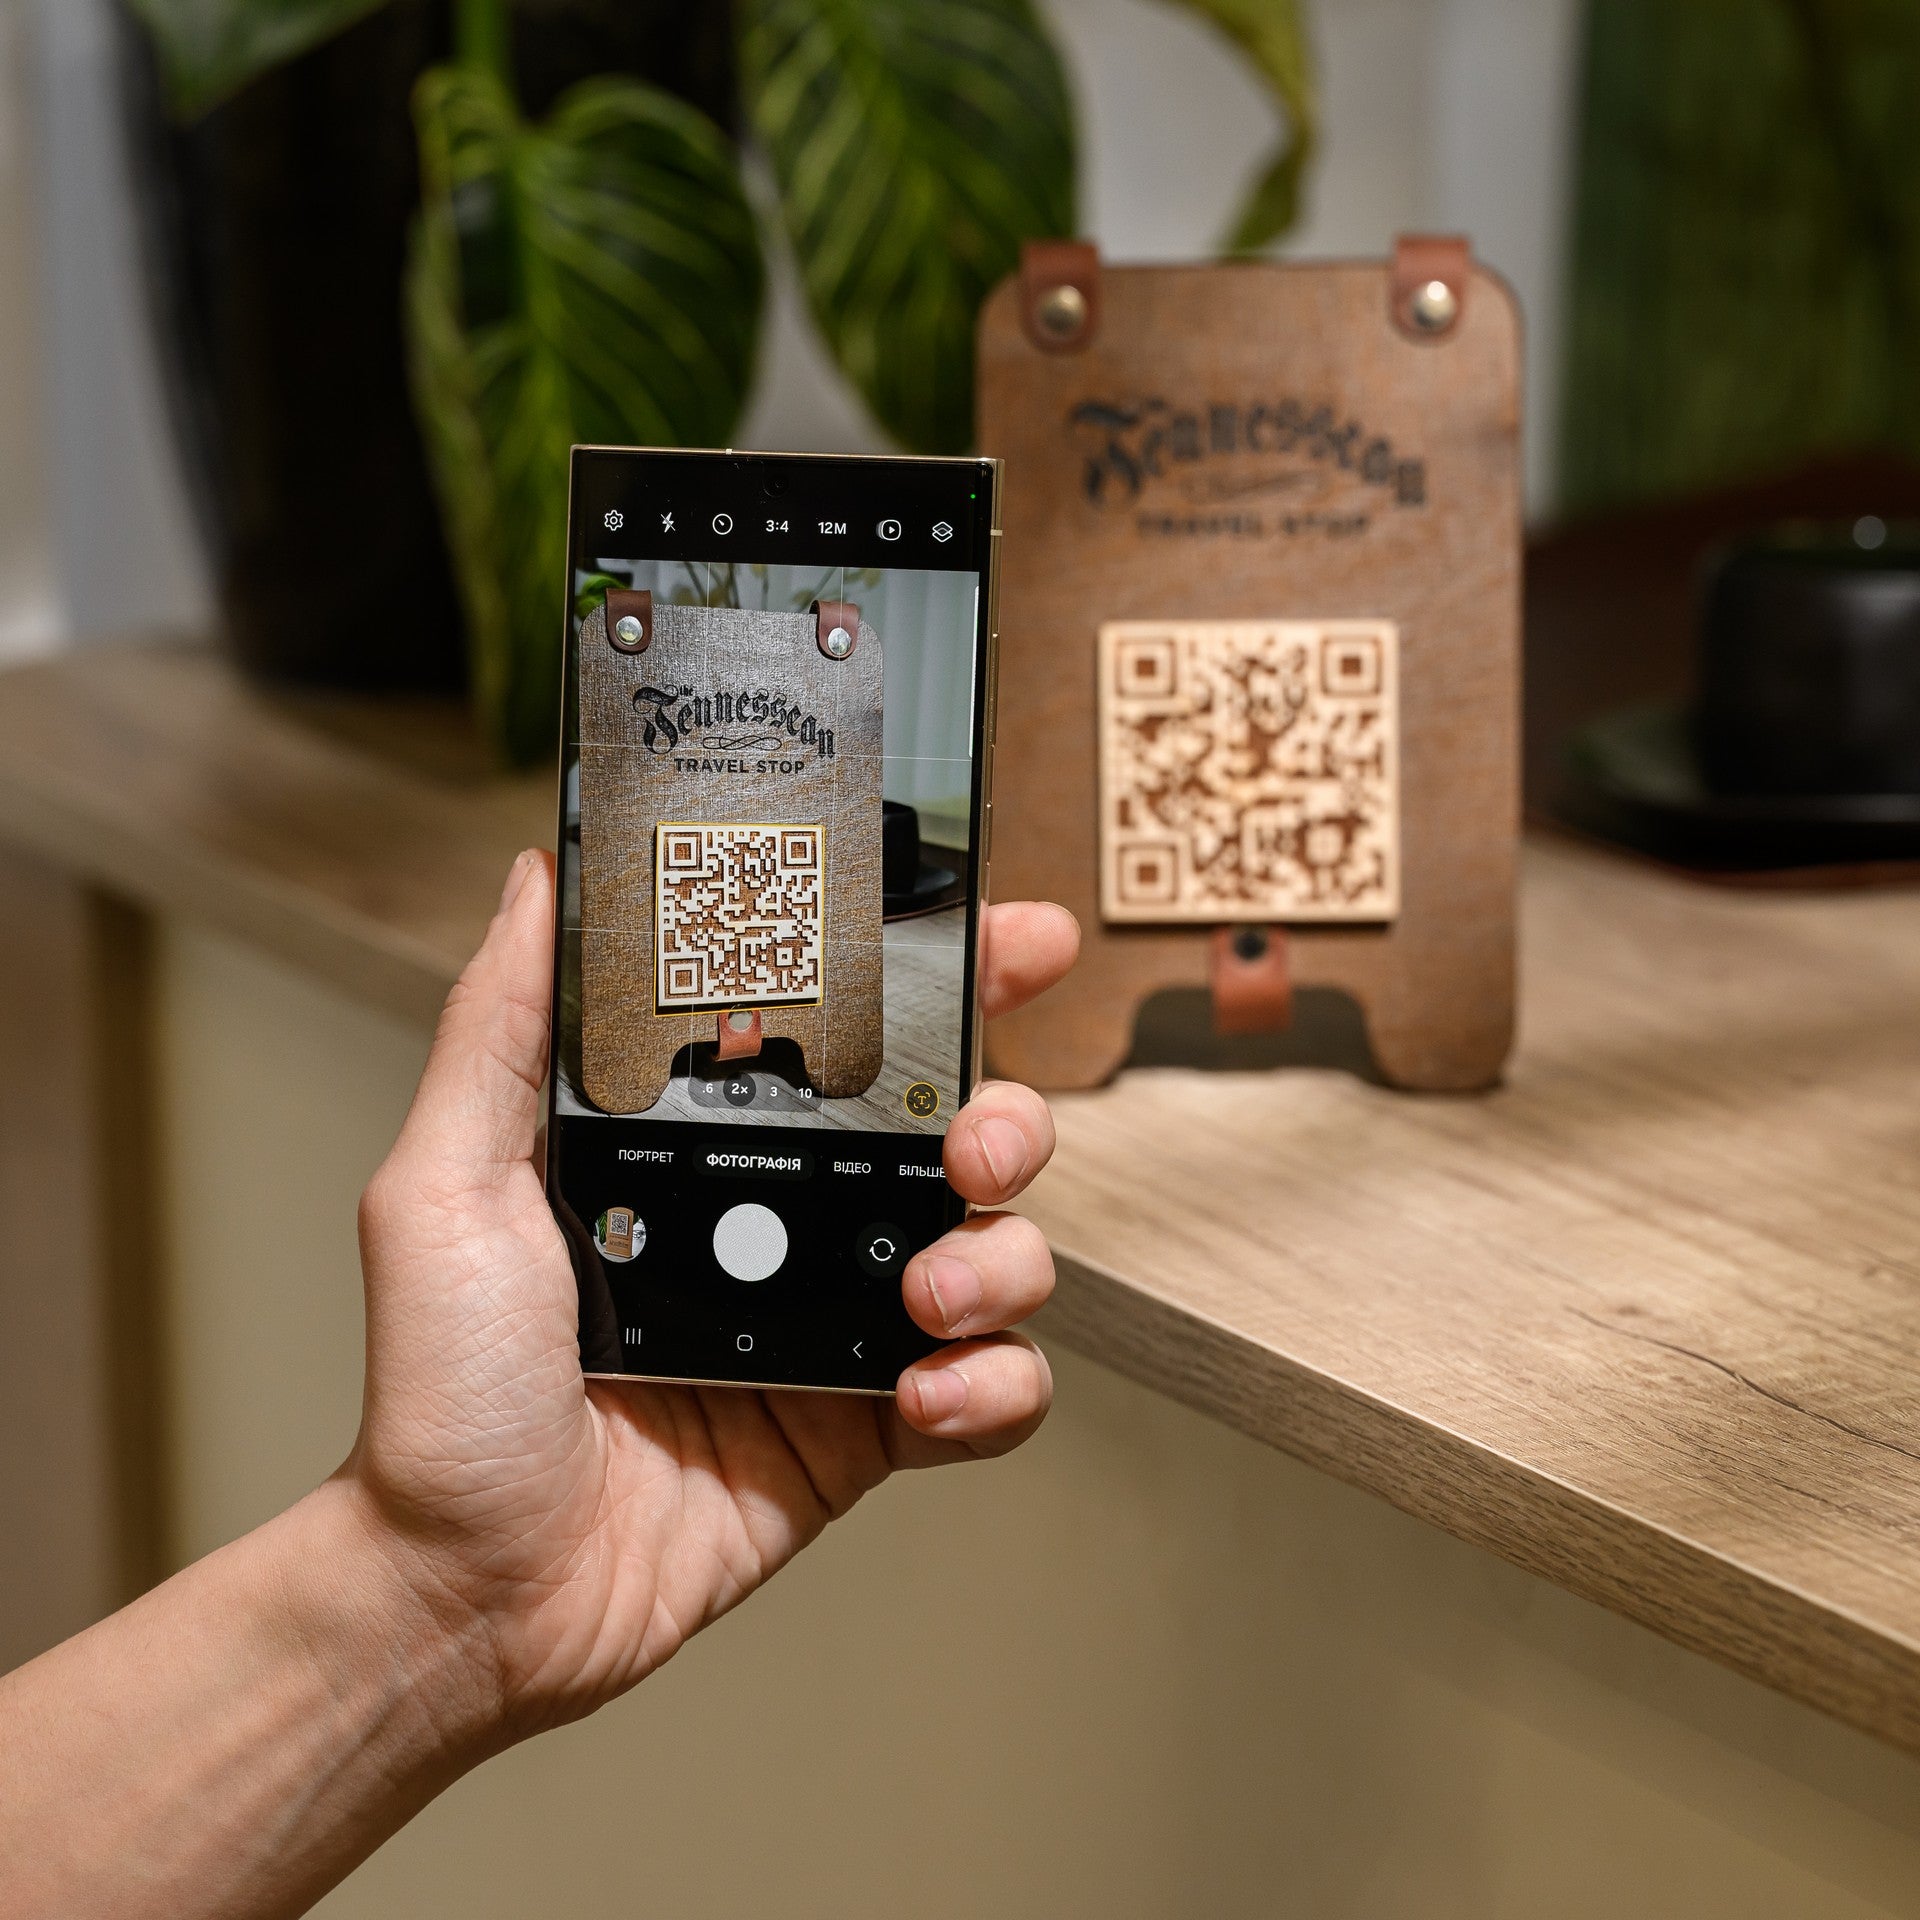 Cafe Restaurant Sign with QR code for menu access. Touchless and convenient, perfect for modern dining experiences.